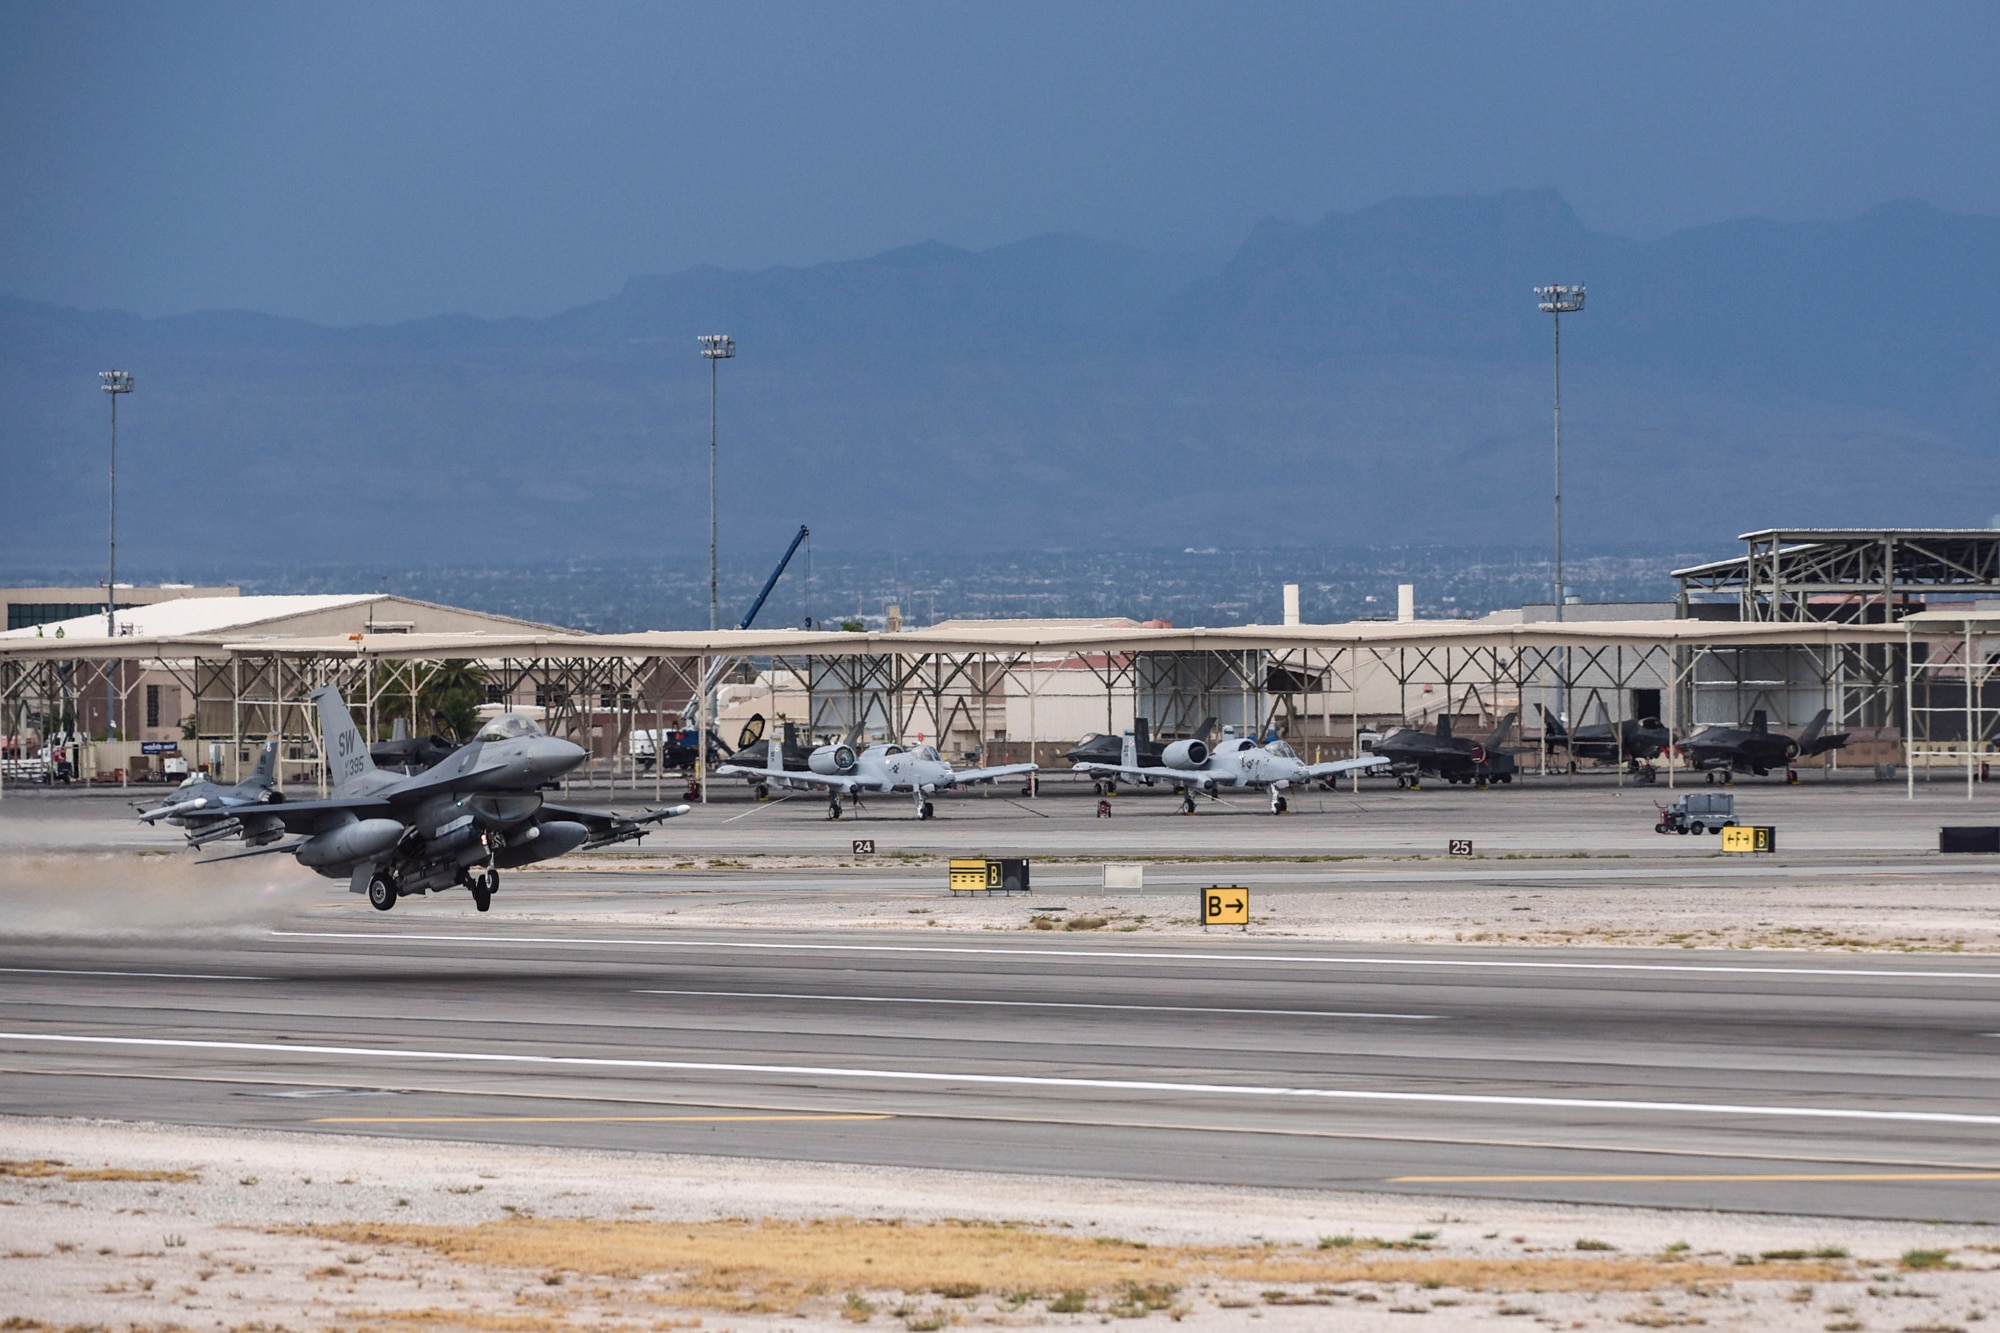 An F-16 Fighting Falcon from the 55th Fighter Squadron, Shaw Air Force Base, S.C., takes off from the runway at Nellis Air Force Base, Nev., during Red Flag 17-3 July 24, 2017. The 55th FS is one of several squadrons that are participating in the Air Force’s premier multi-domain integration combat training exercise. (U.S. Air Force photo by Airman 1st Class Andrew D. Sarver/Released)